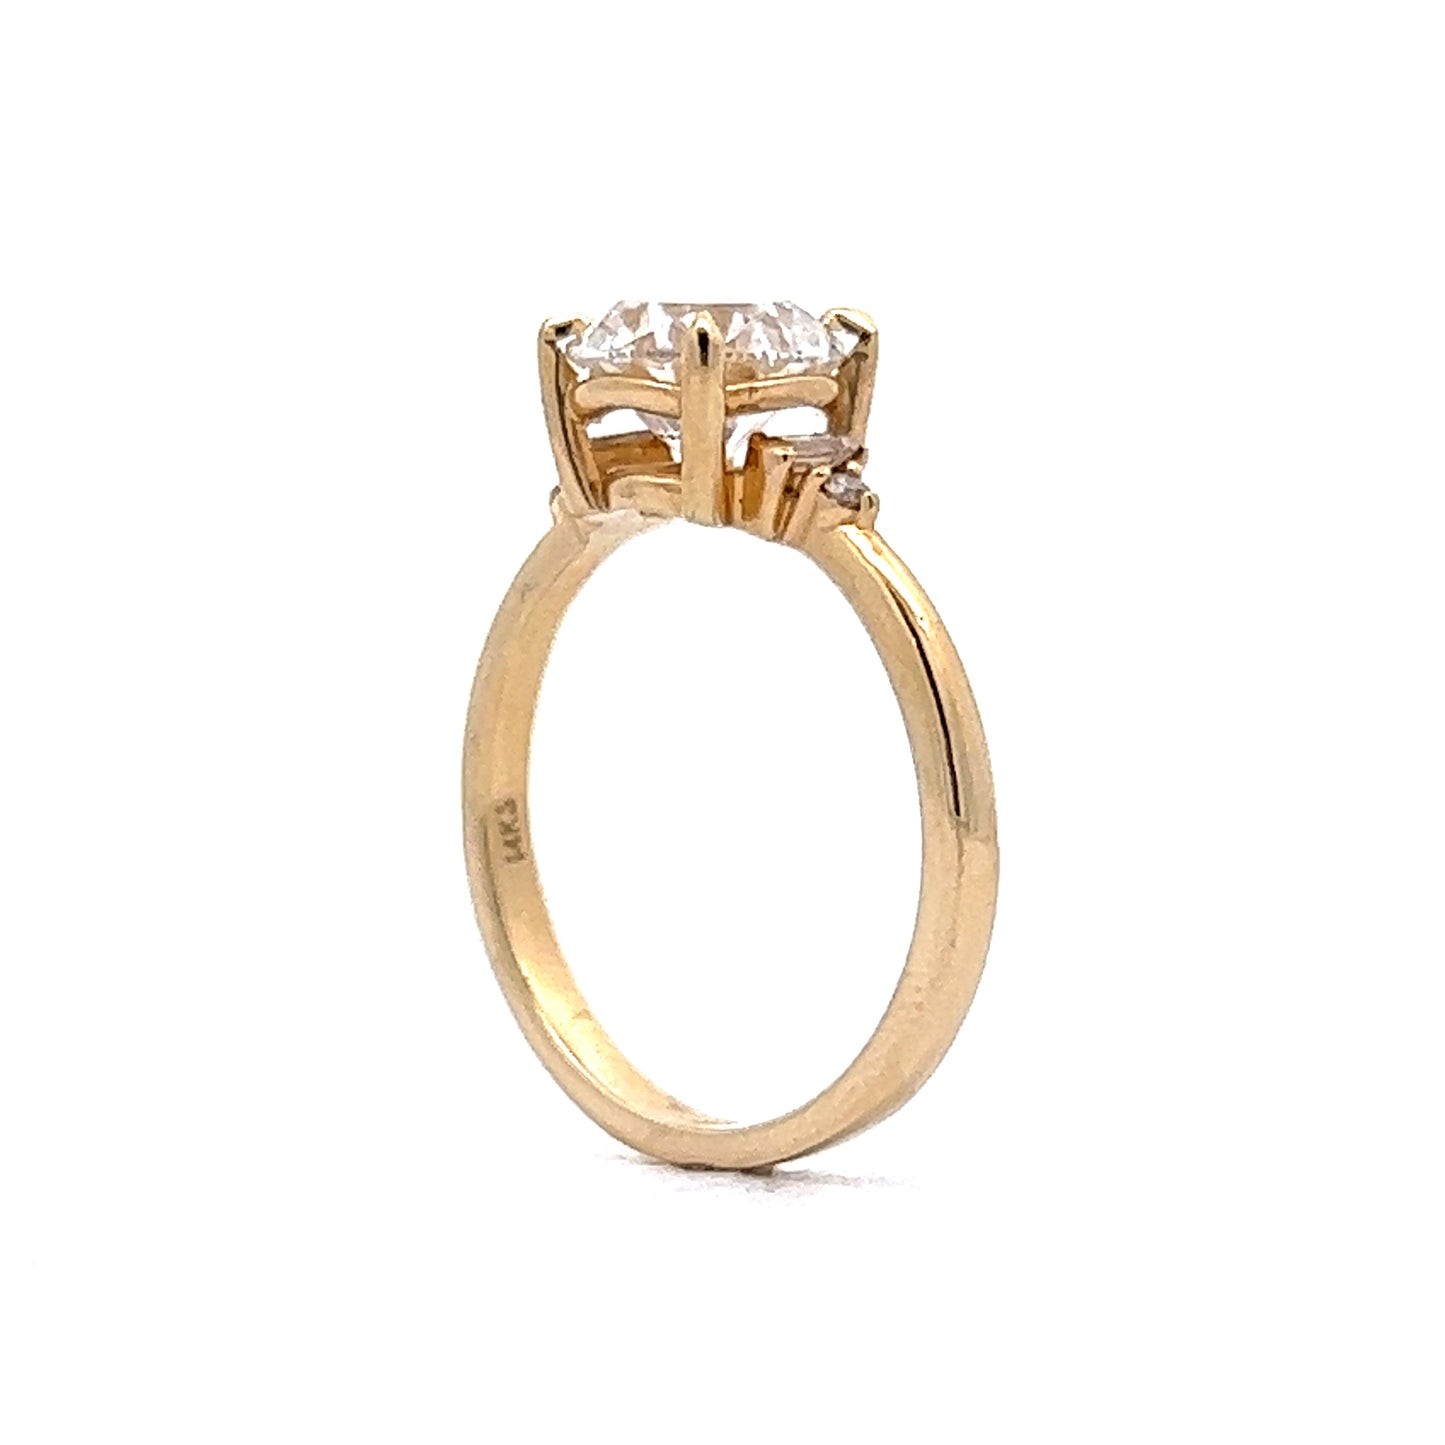 2.01 Round Brilliant Cut Diamond Engagement Ring in 14k Yellow Gold